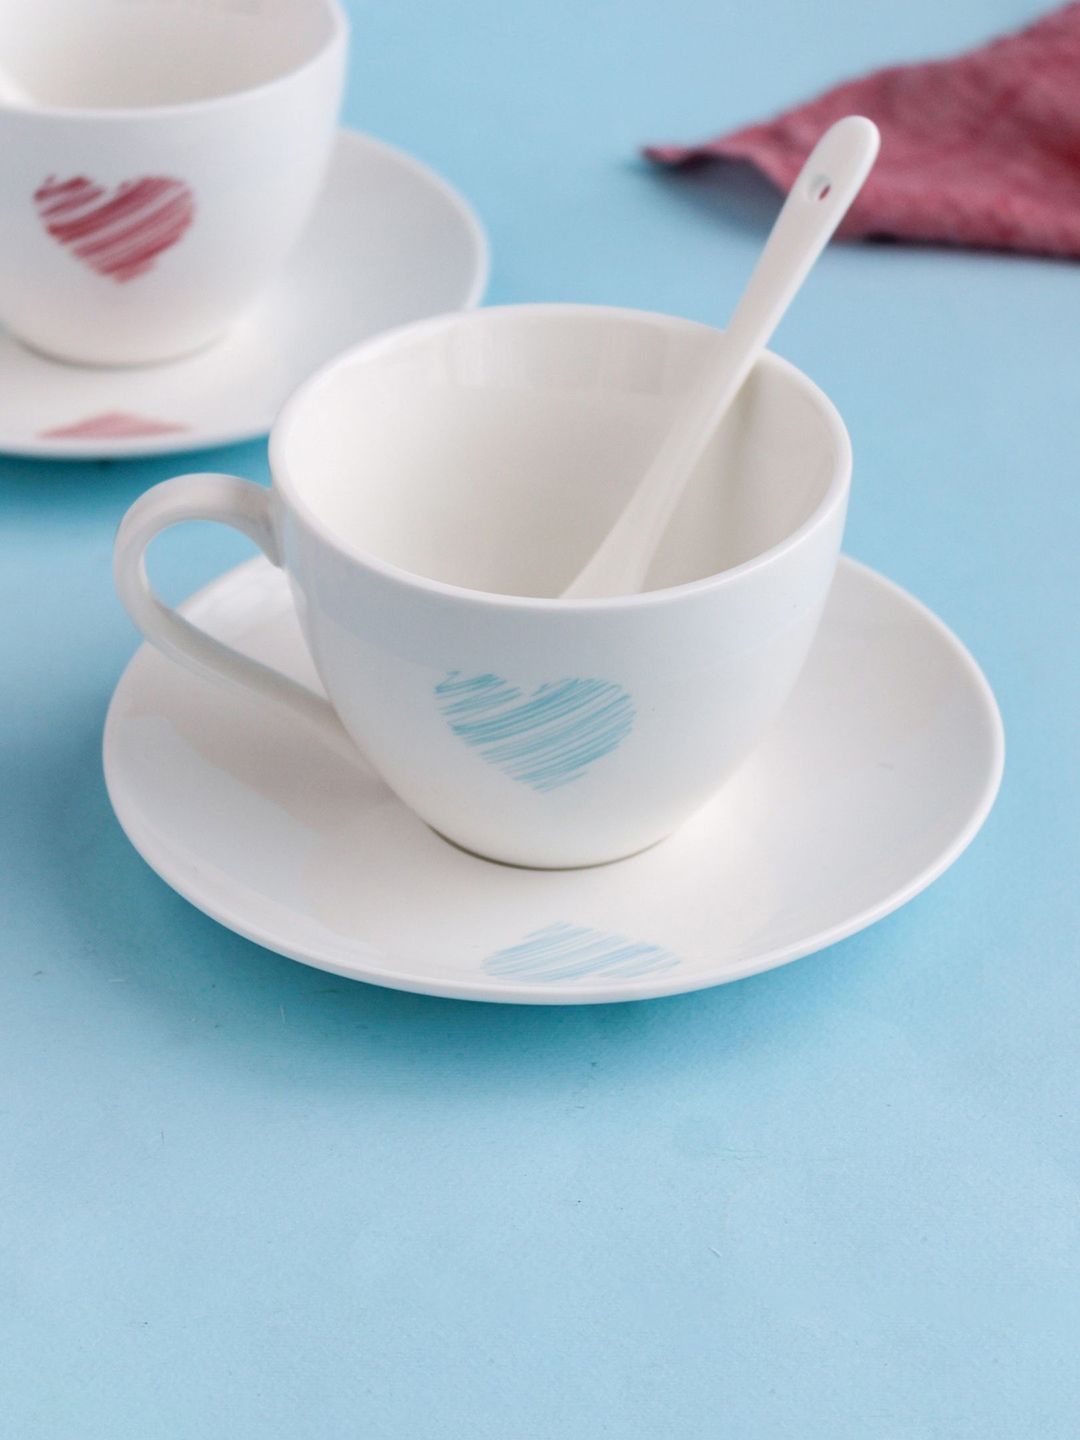 Nestasia White & Blue Heart Ceramic Cup and Saucer with Spoon Price in India